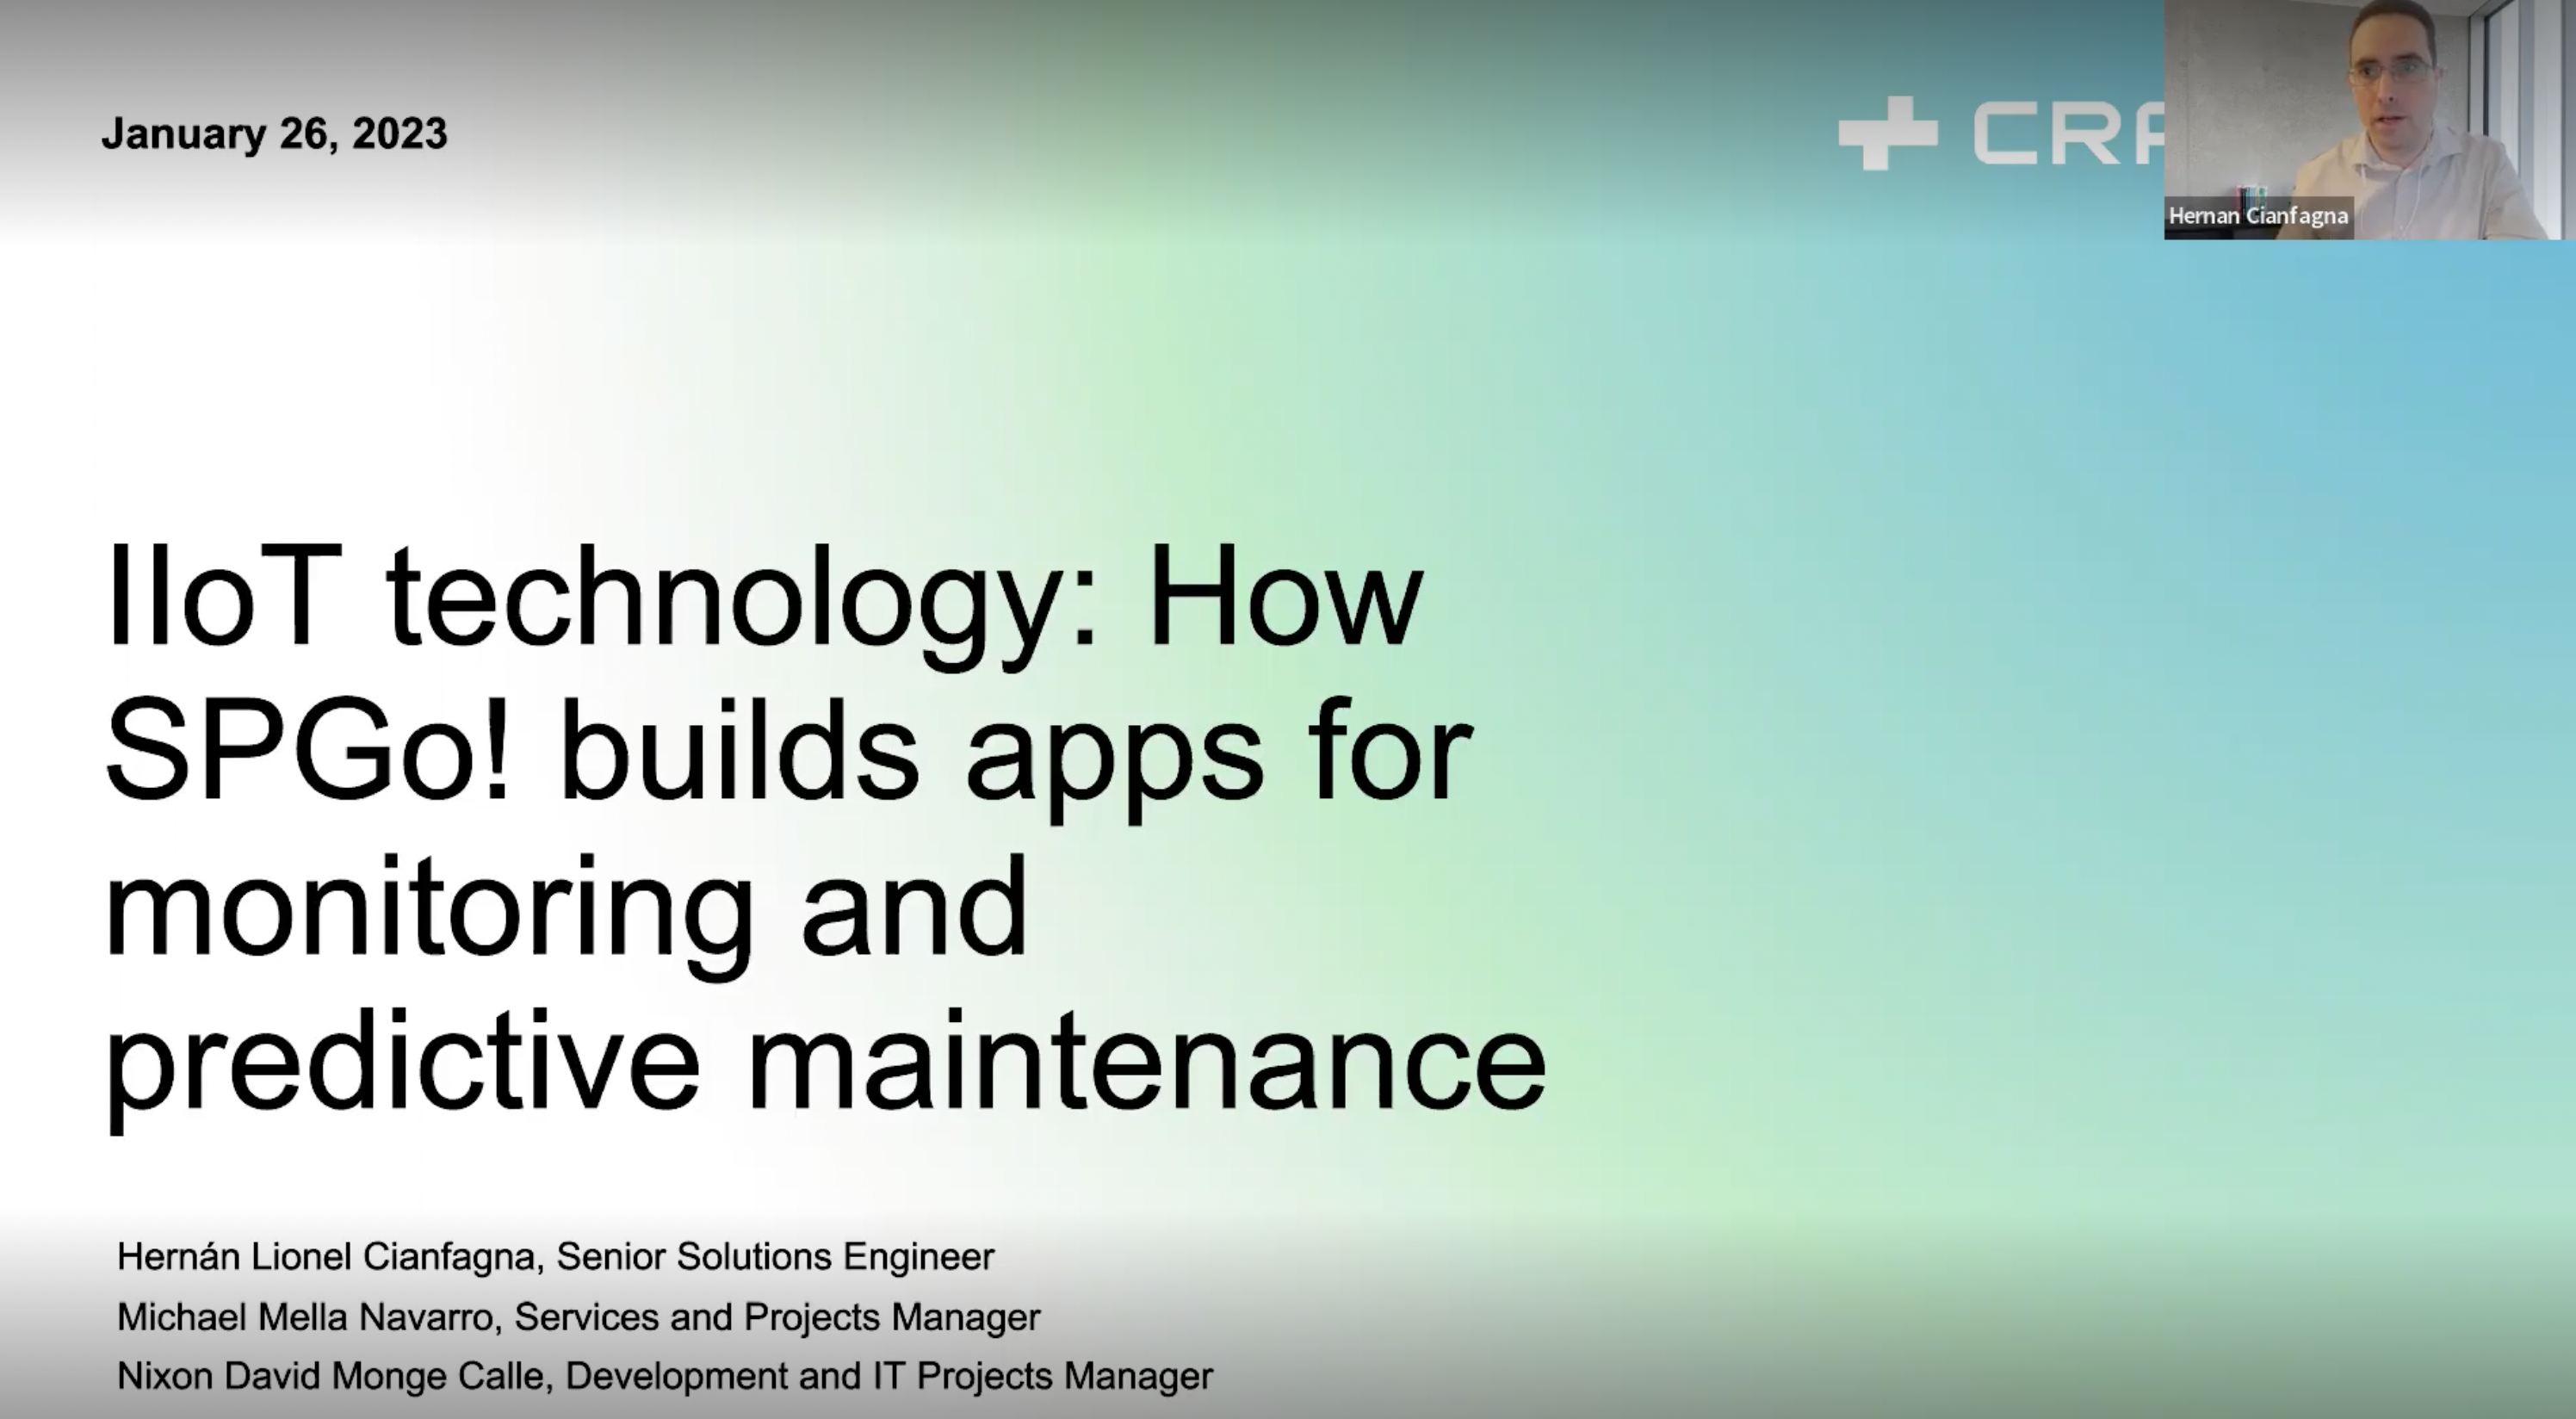 How SPGo! builds apps for monitoring and predictive maintenance